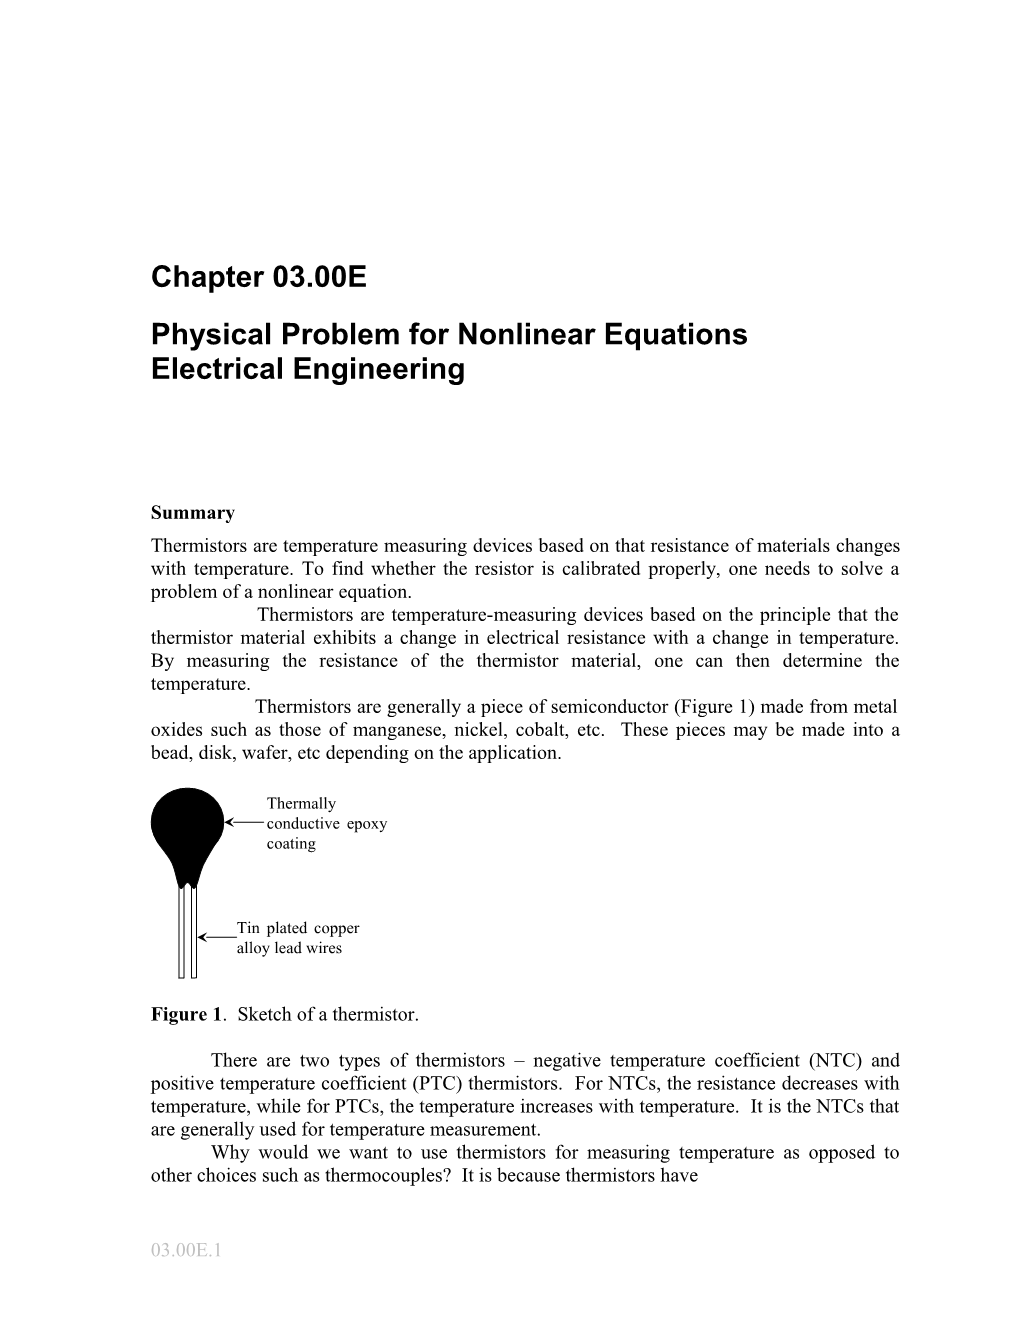 Physical Problem for Nonlinear Equations: Electrical Engineering